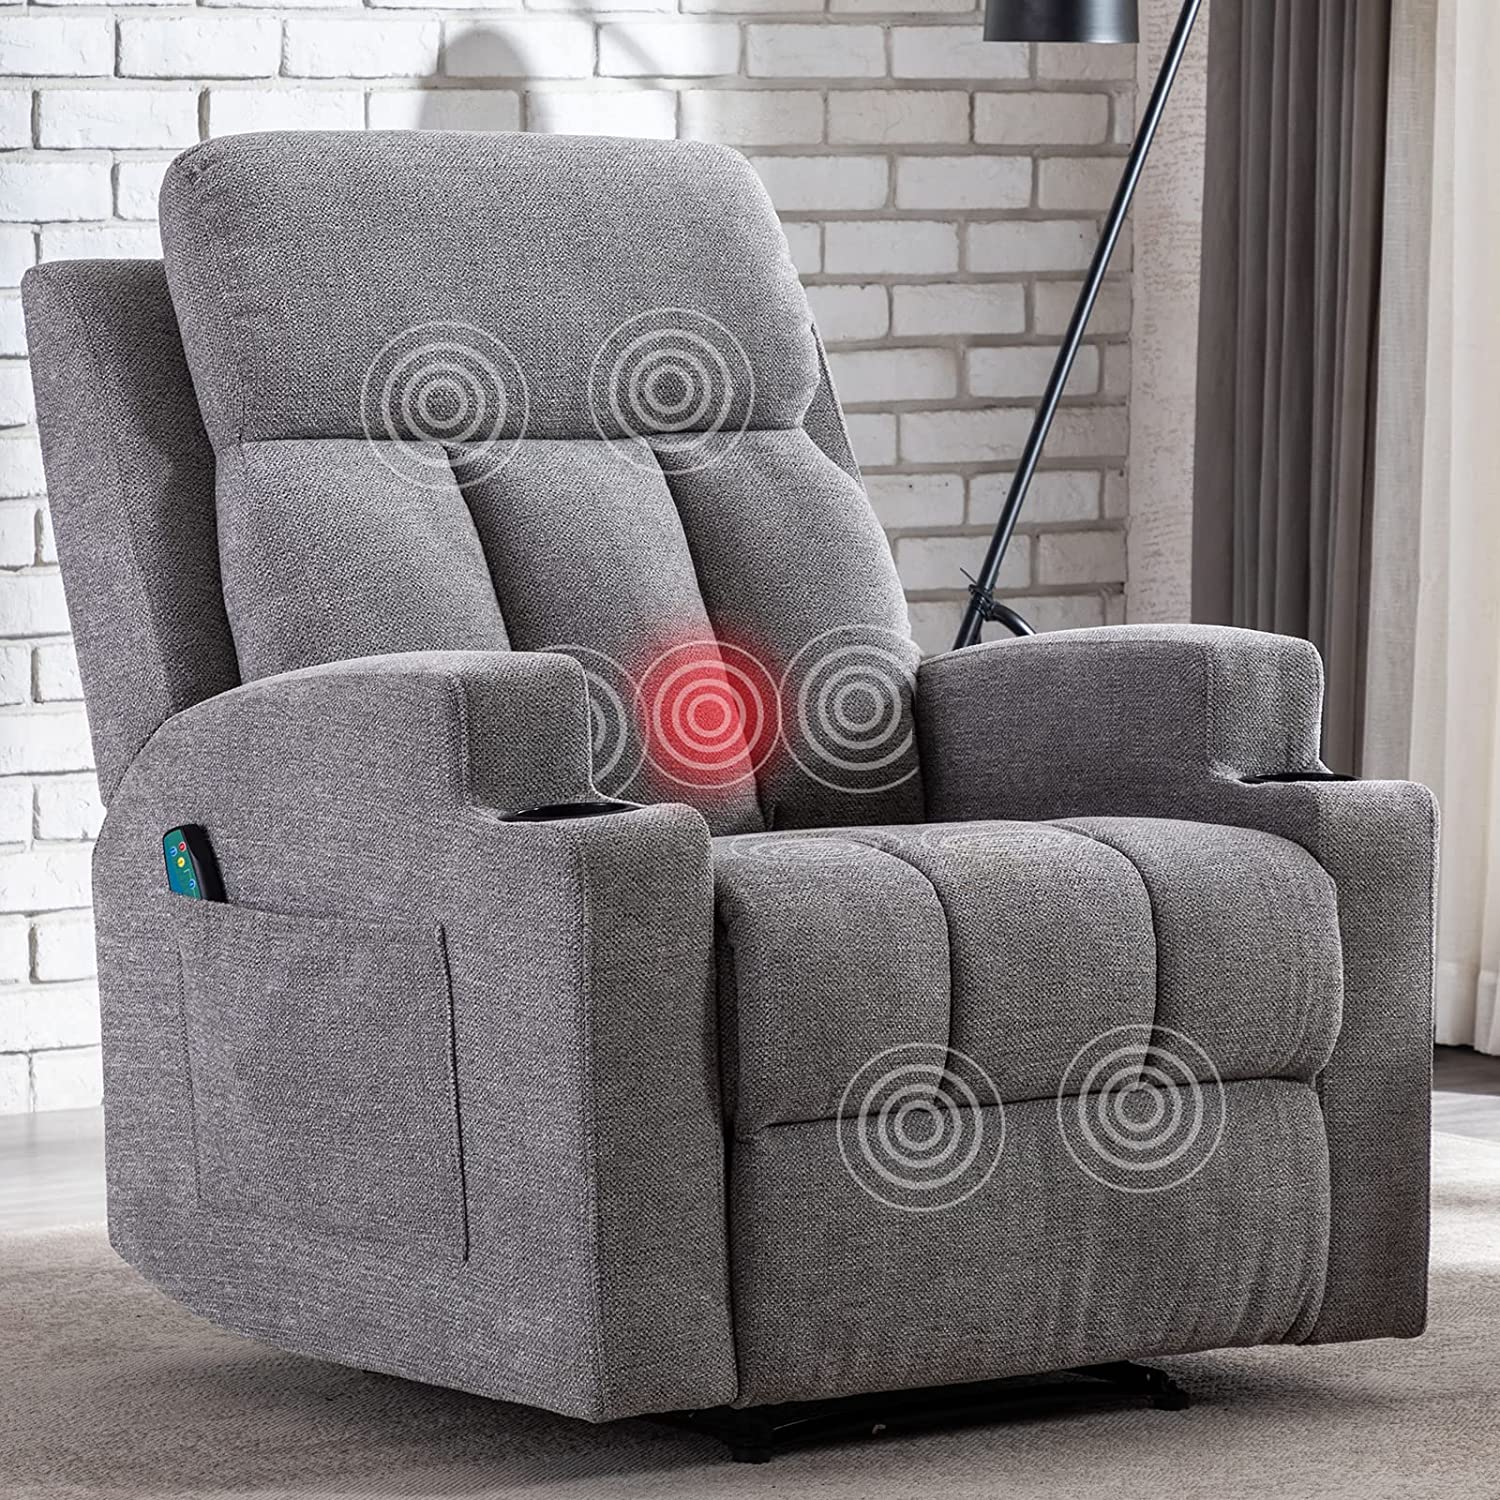 Best Recliners for Bad Backs - ANJ HOME Massage Recliner Chair